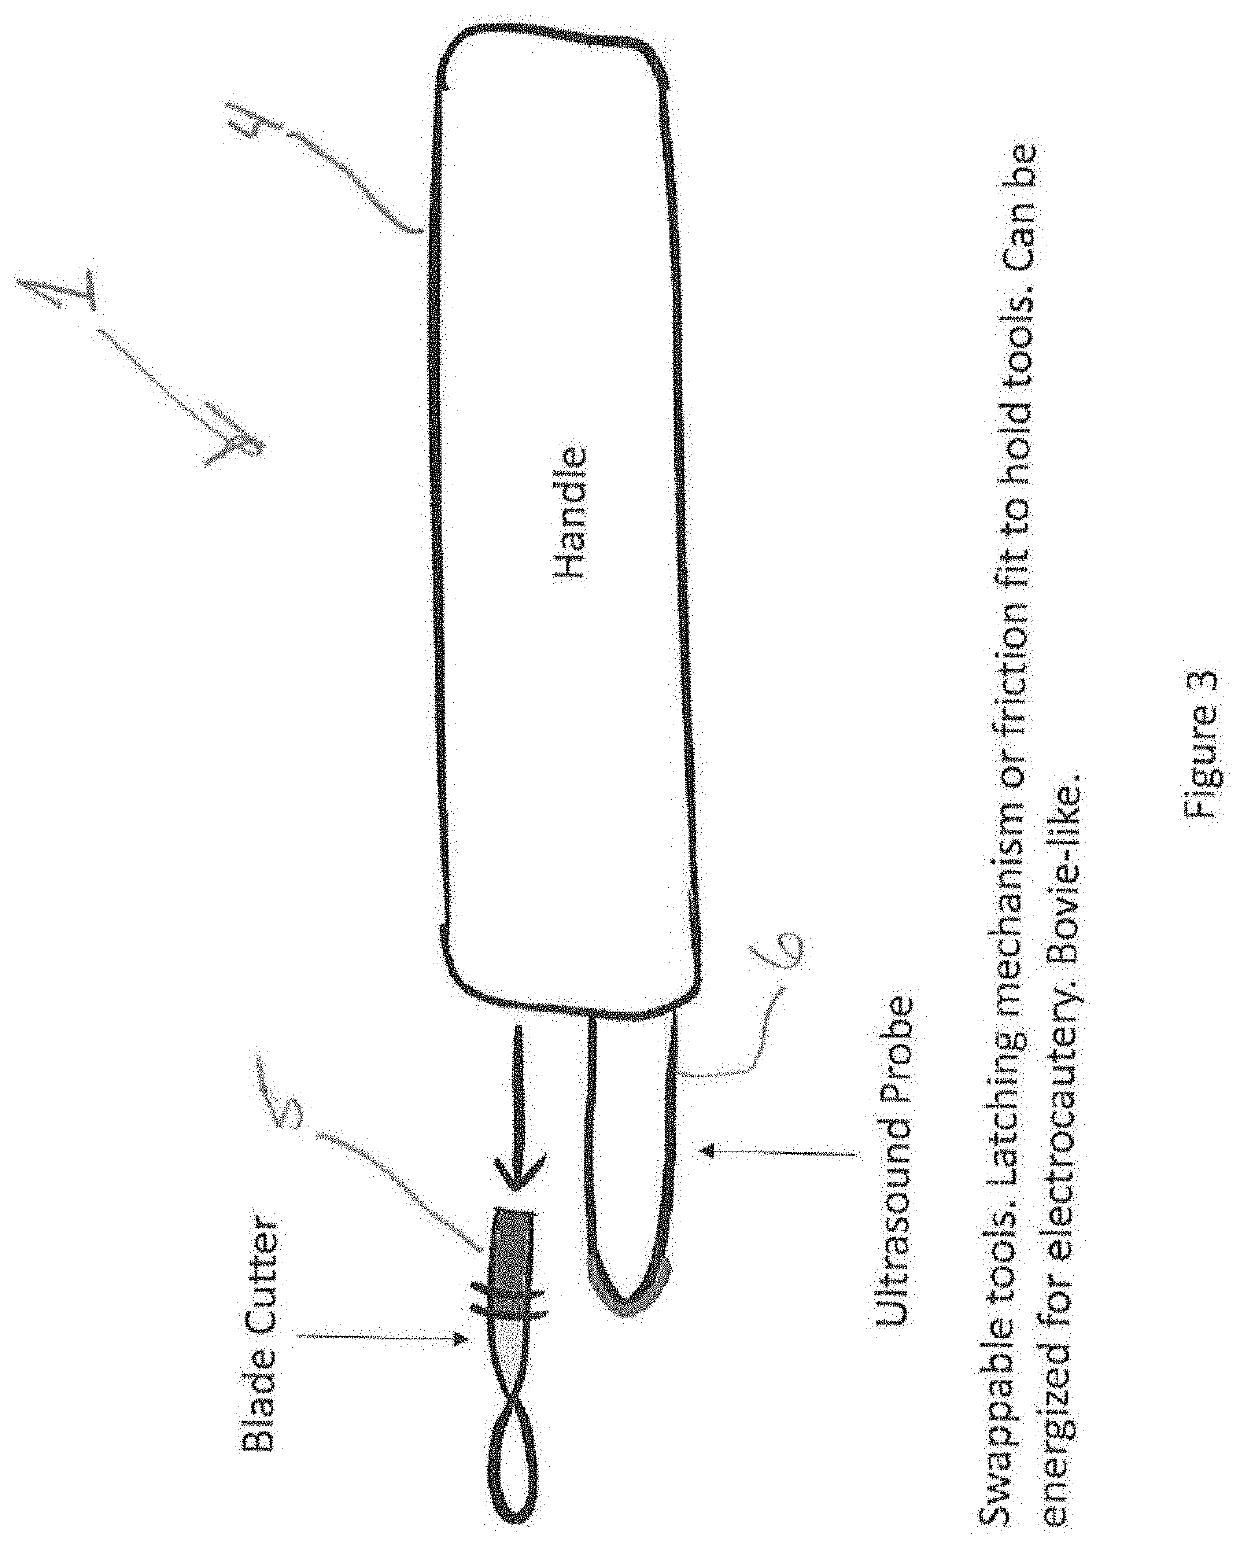 Electrocautery apparatus and method featuring ultrasound guidance